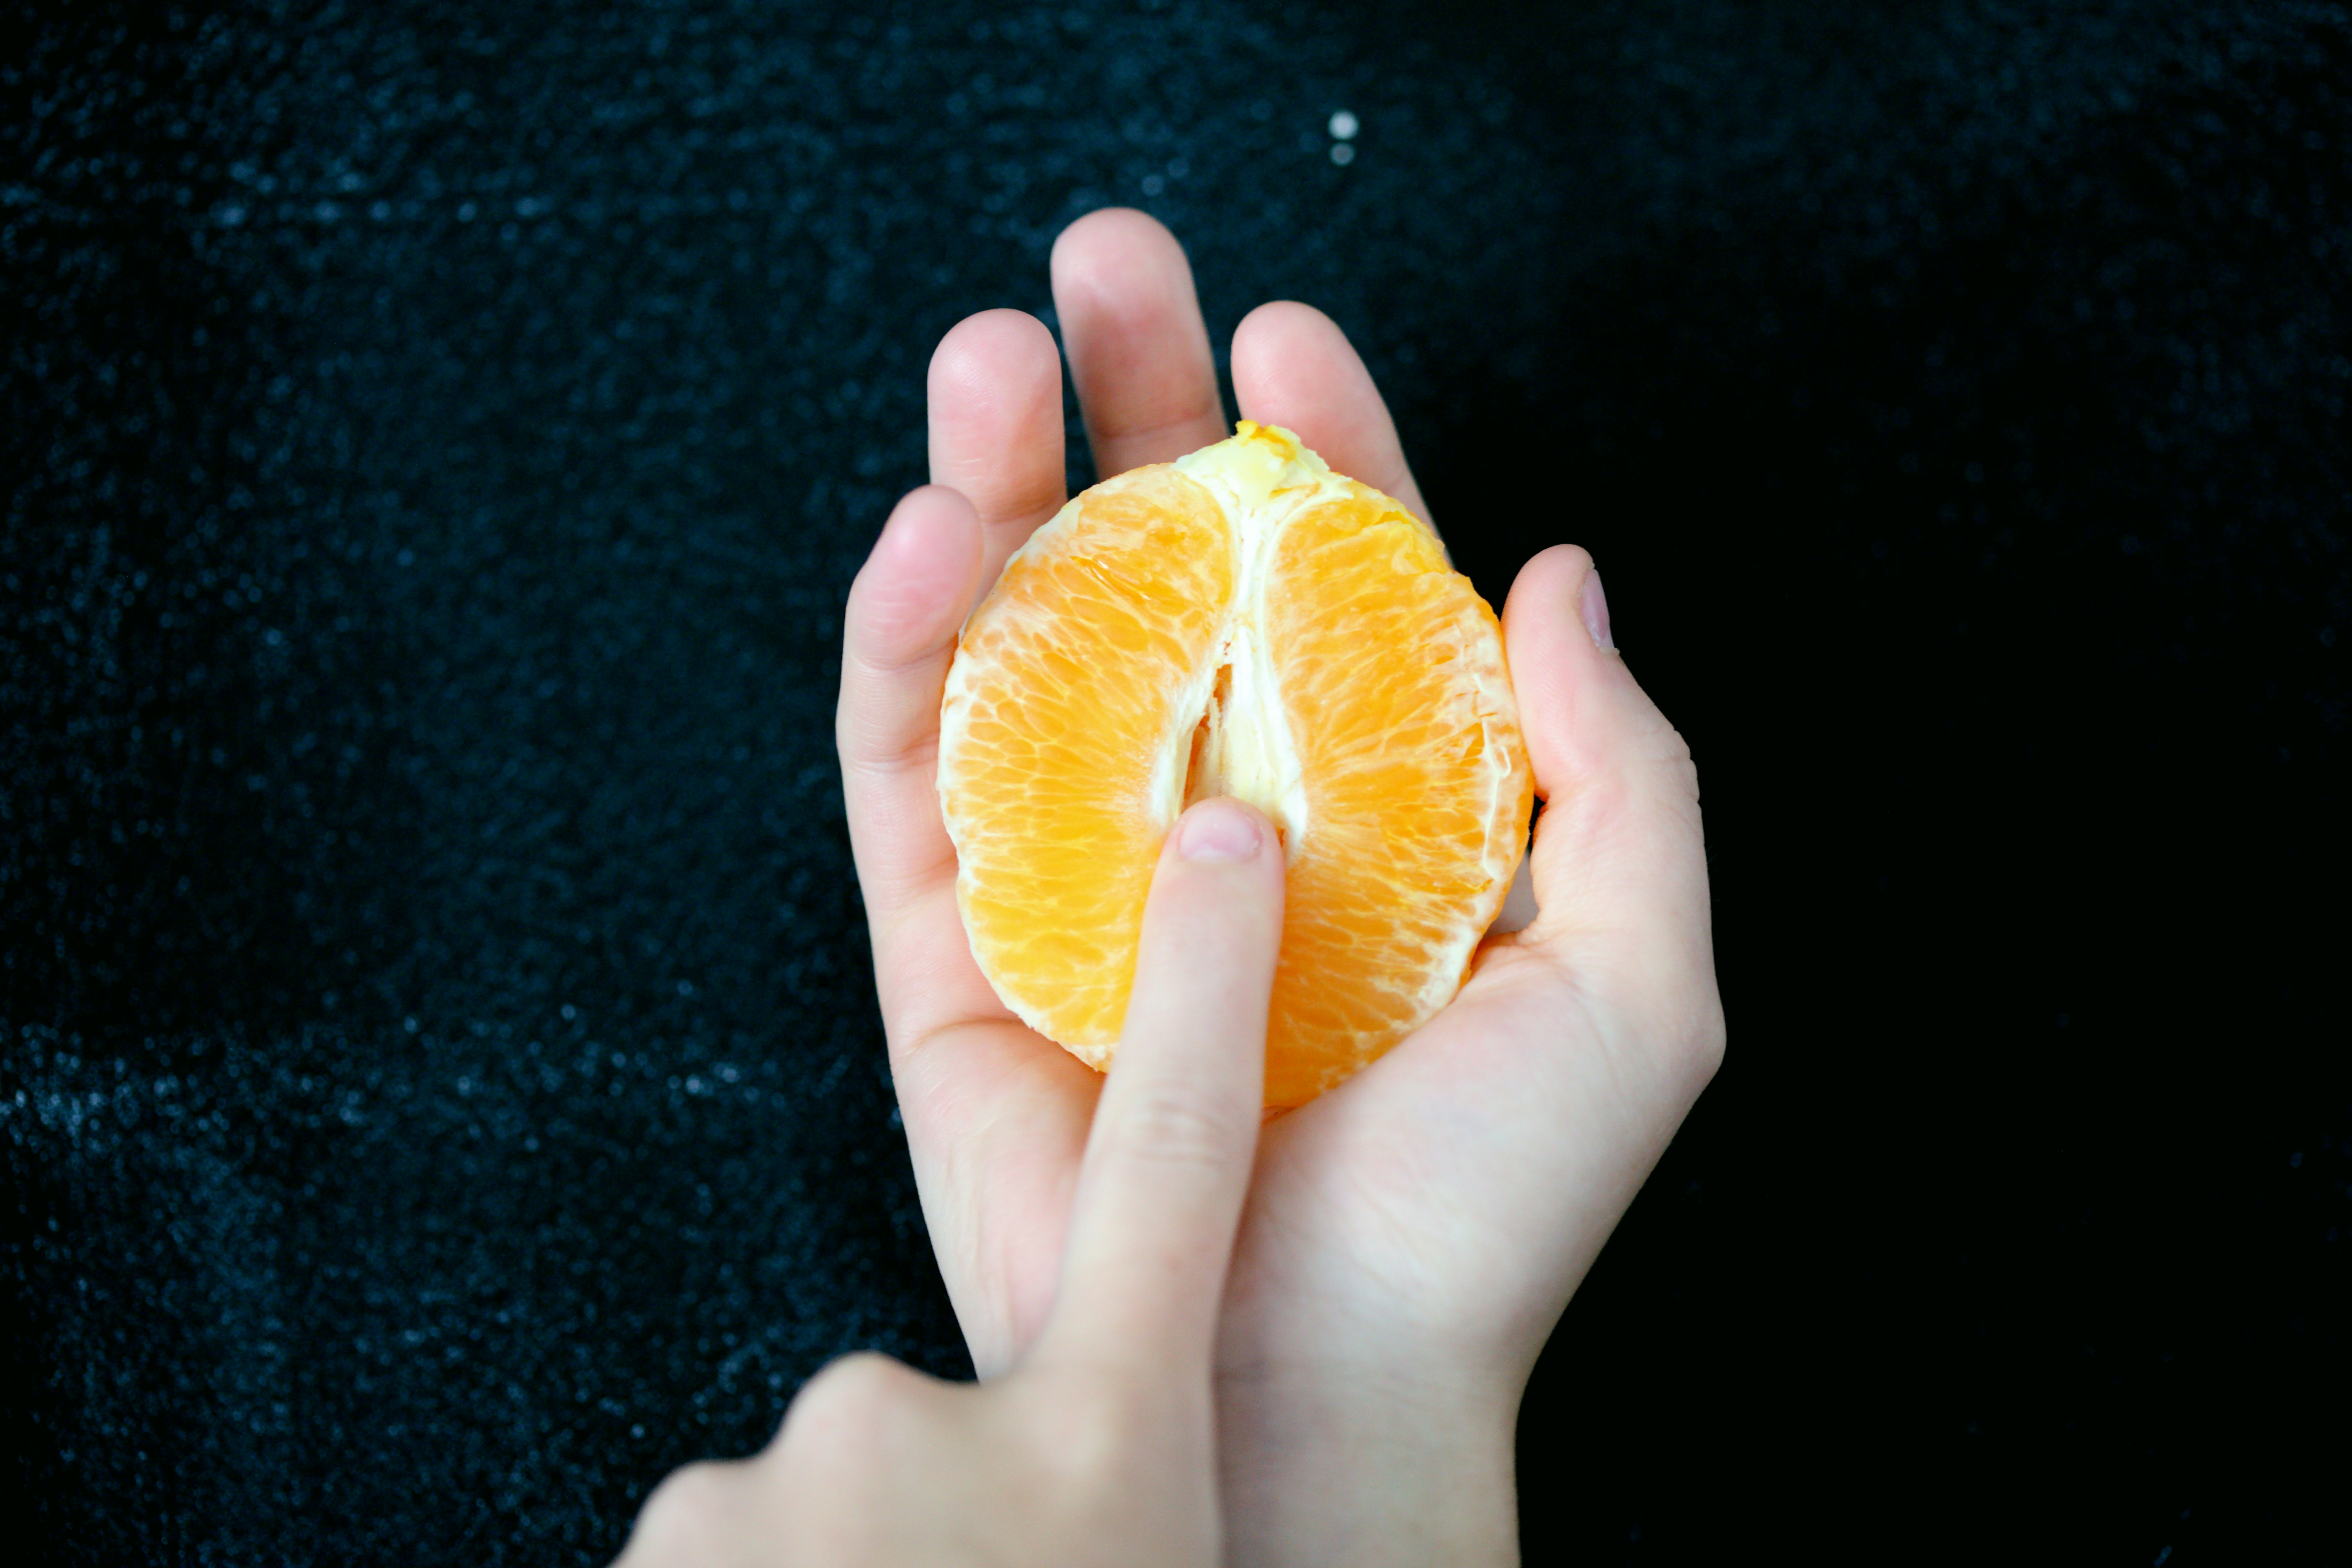 An image of a young person holding a ripe orange to show the similarity of the female genitalia.